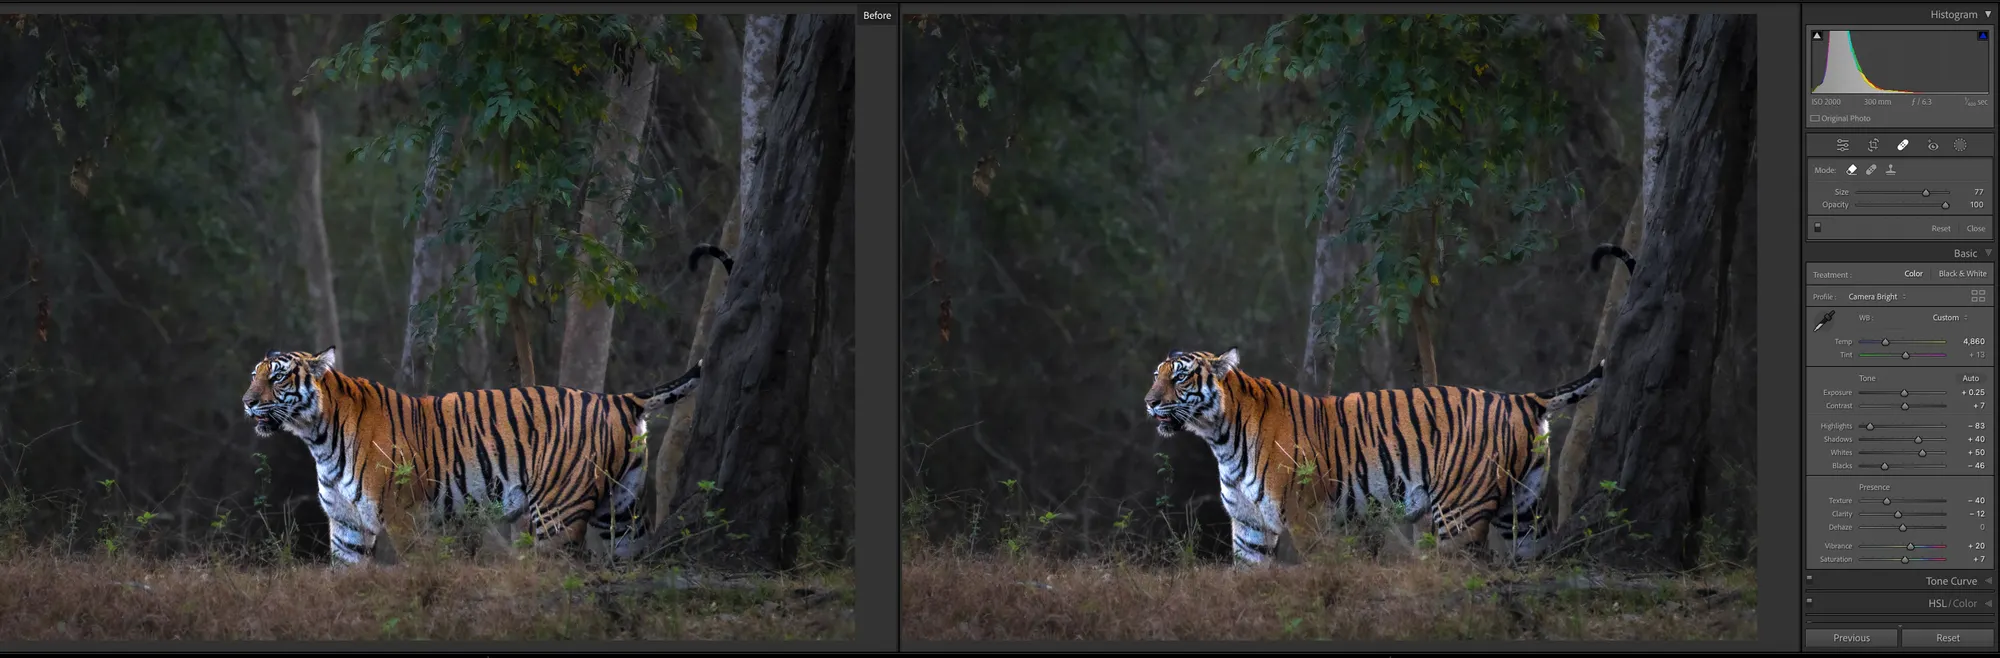 Before / after removing the trees behind the tiger’s head and rear.